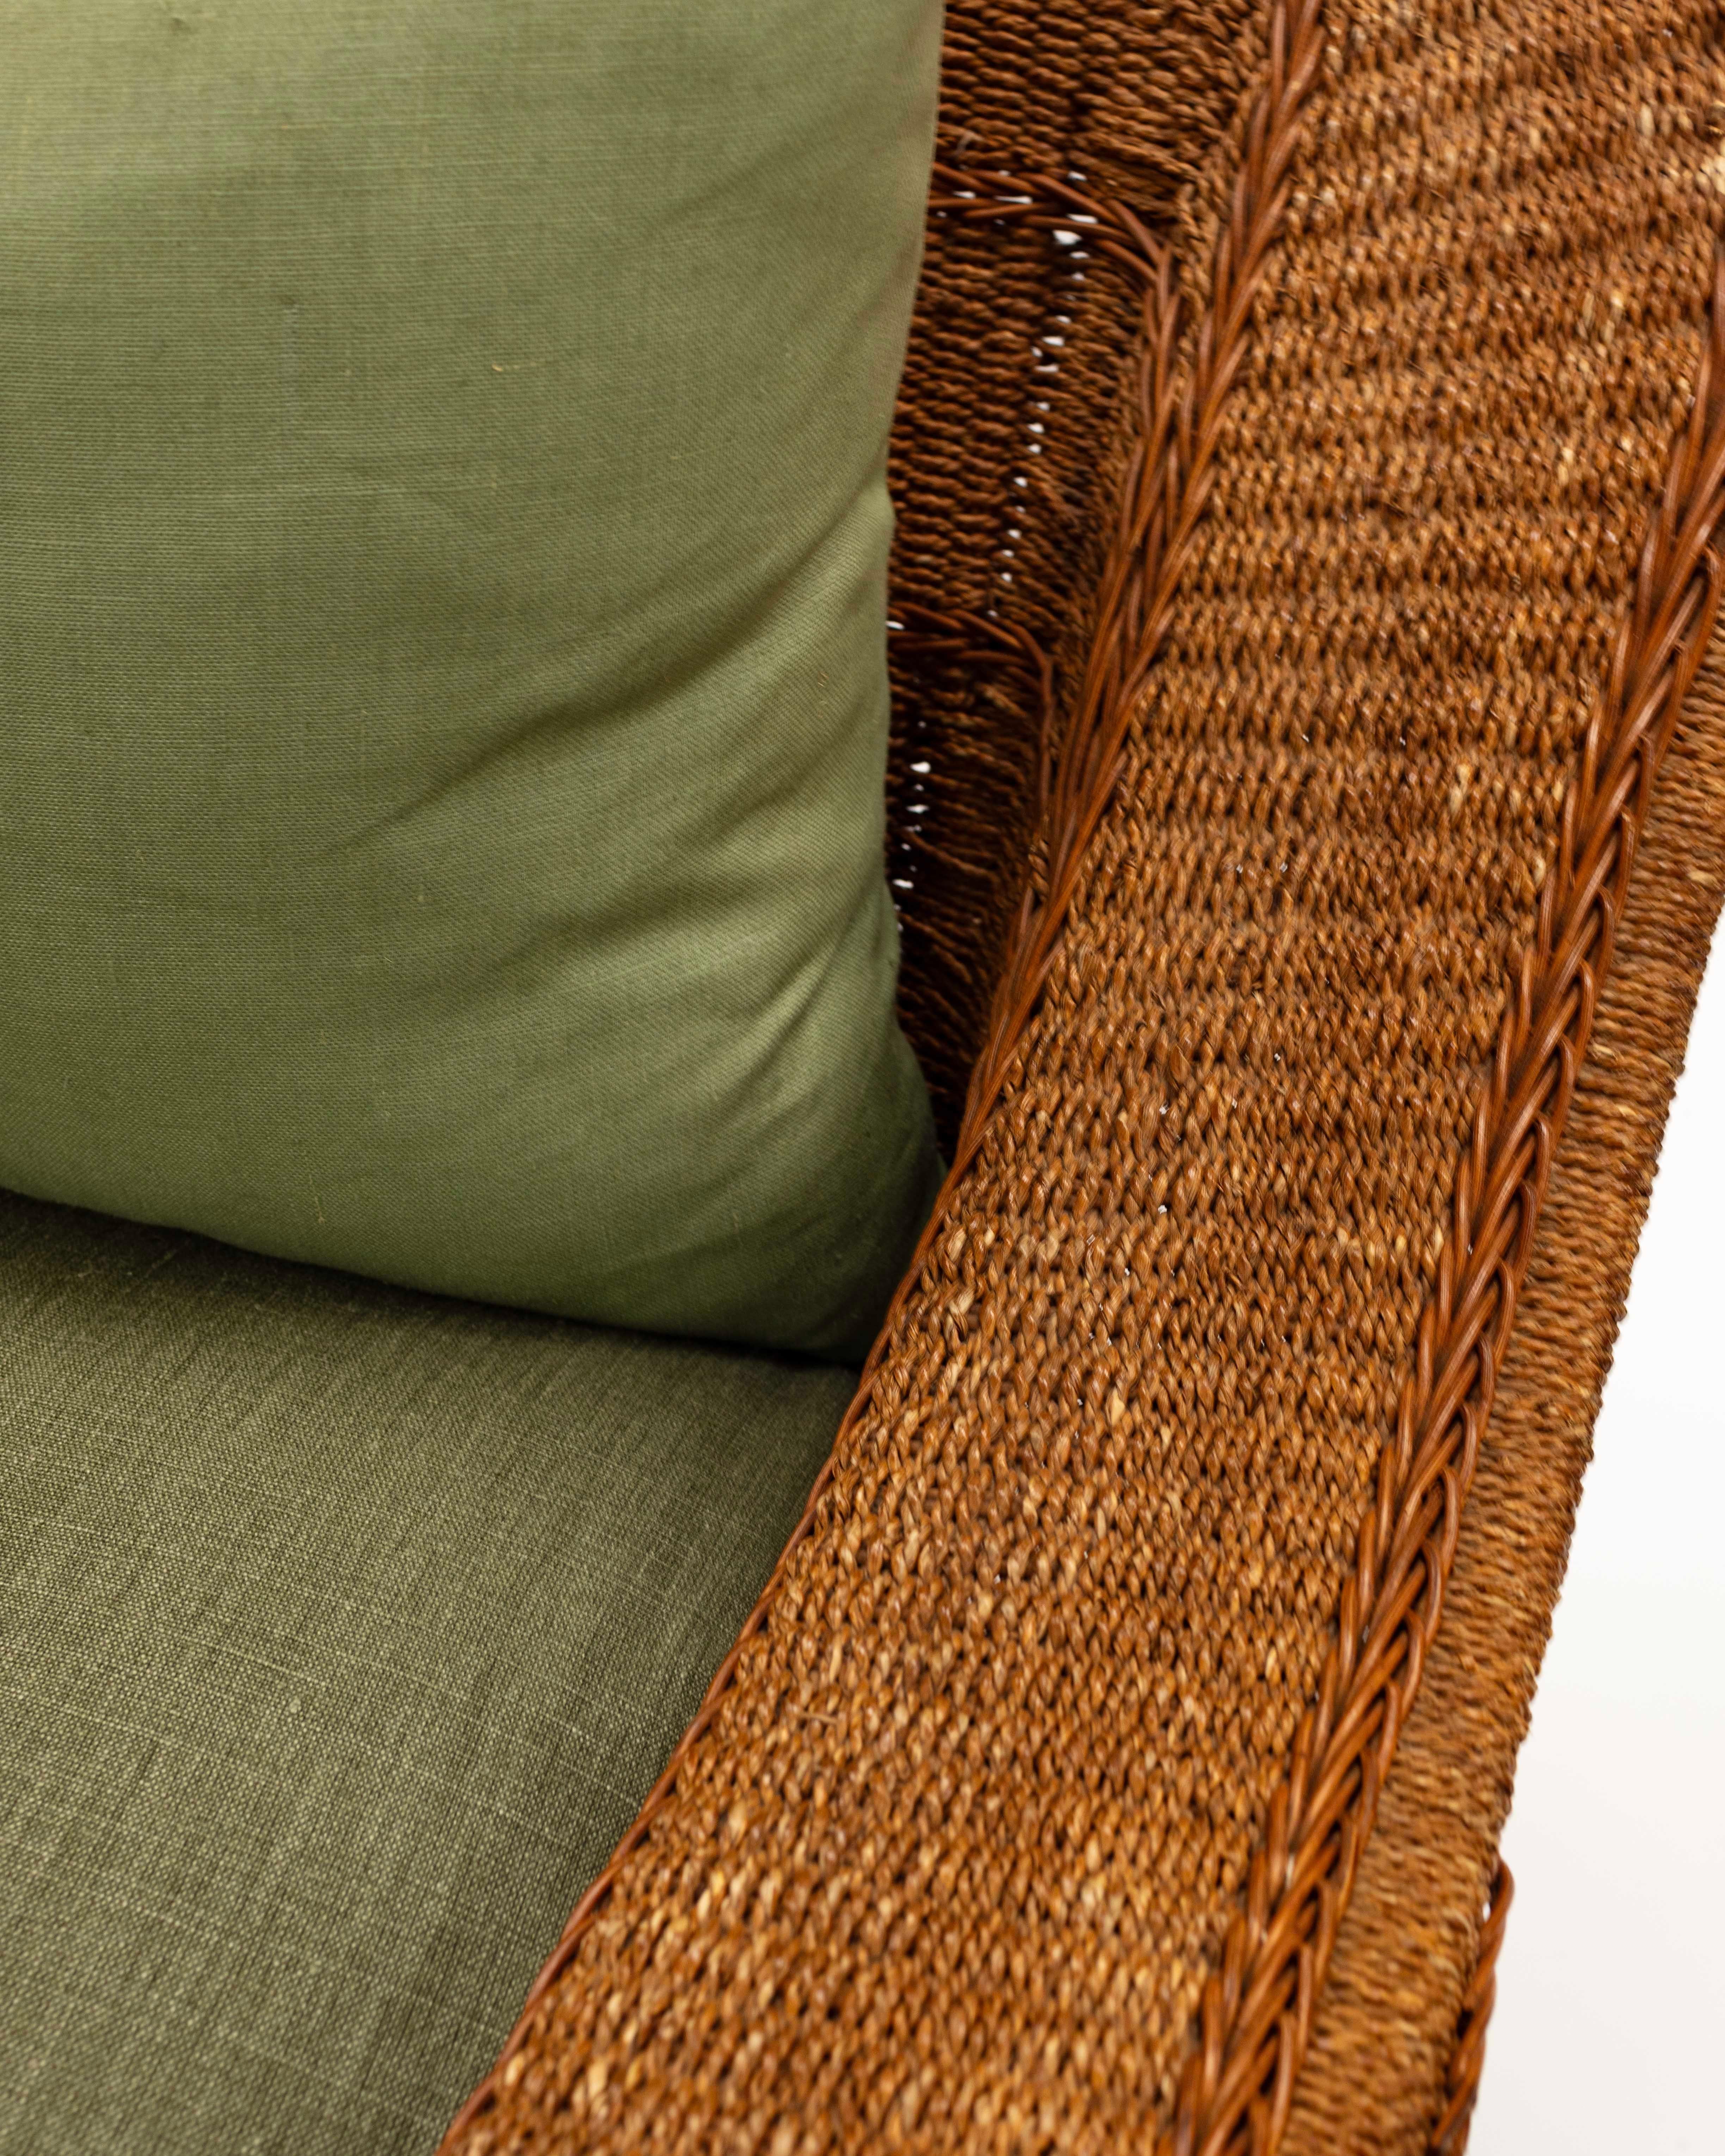 Woven Seagrass large chair with sloped back, tightly woven rush weave with braiding detail.  Heathered sage green canvas linen on seat and back cushion with very unique retractable leg rest.  Sturdy construction and high end upholstery.